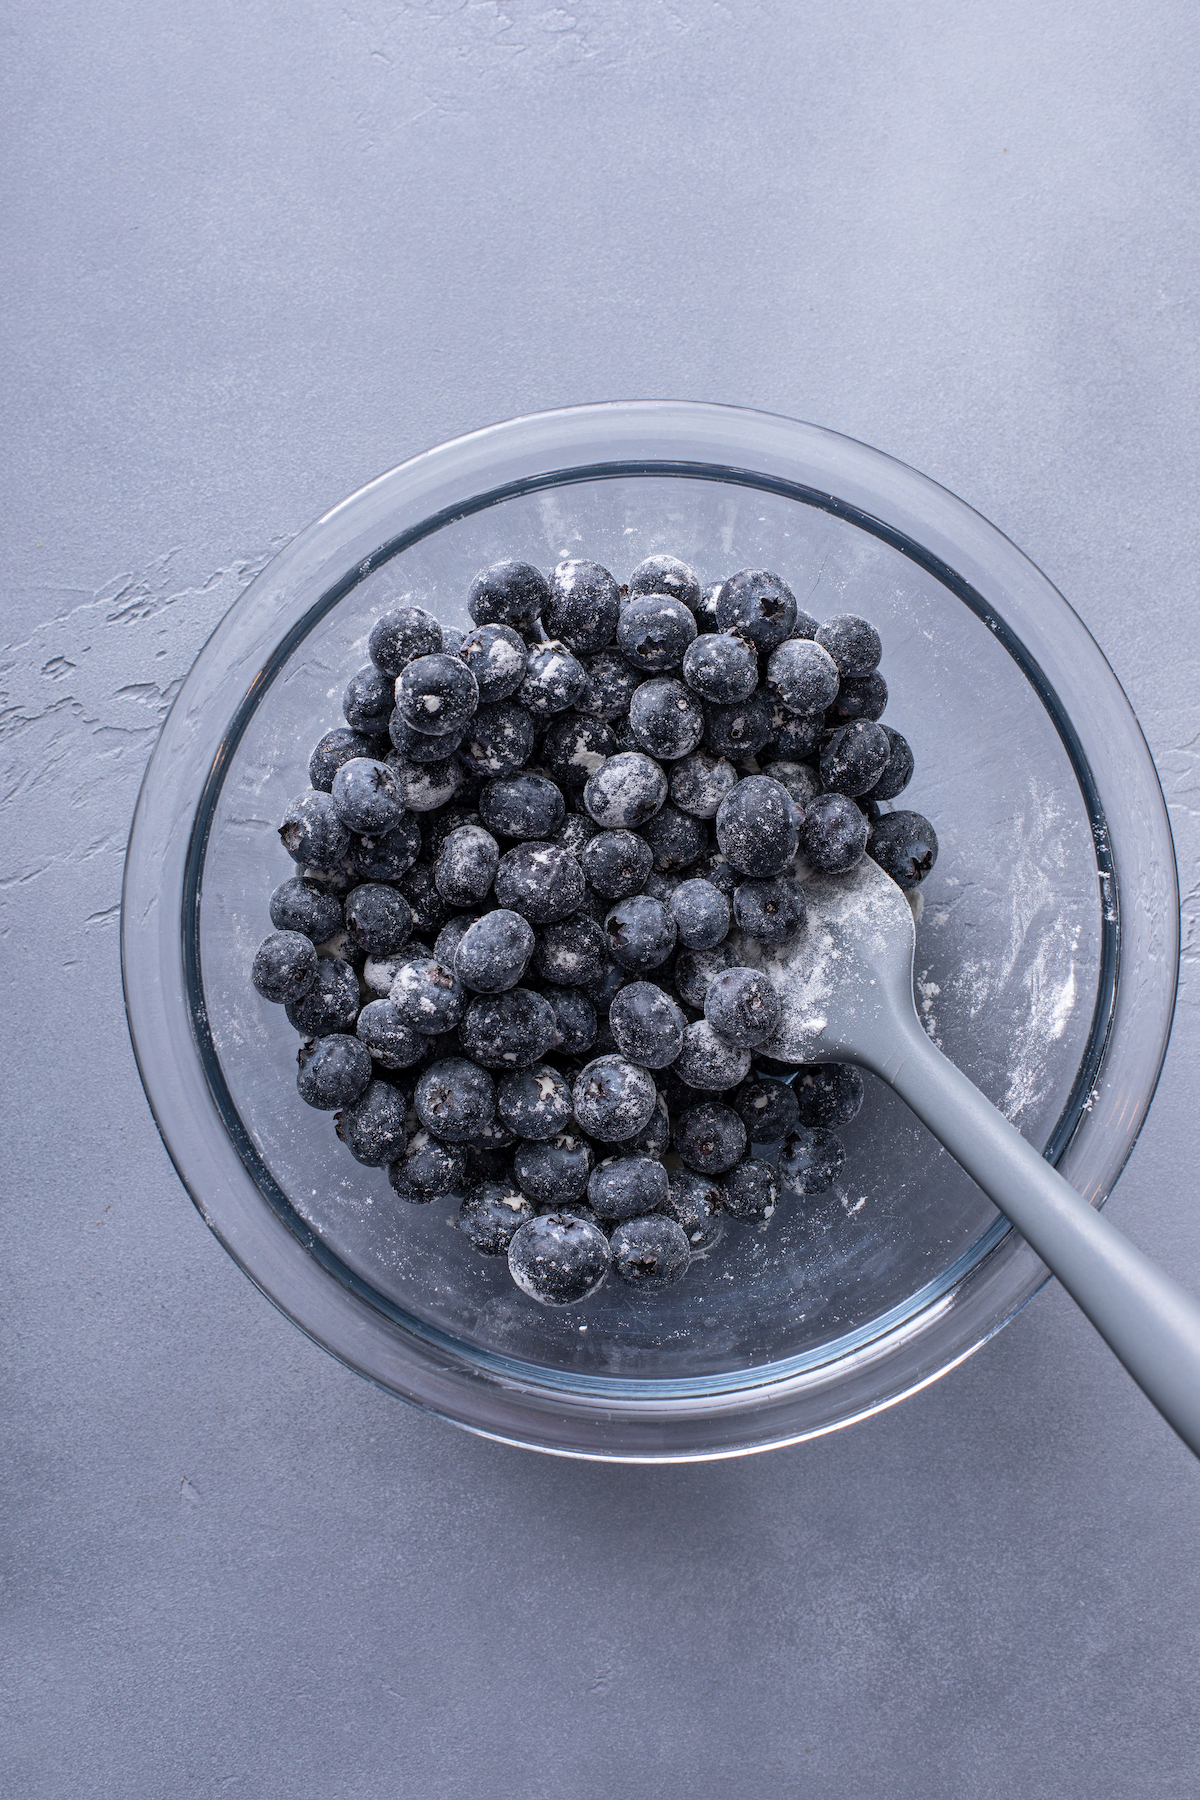 Coating blueberries with flour.